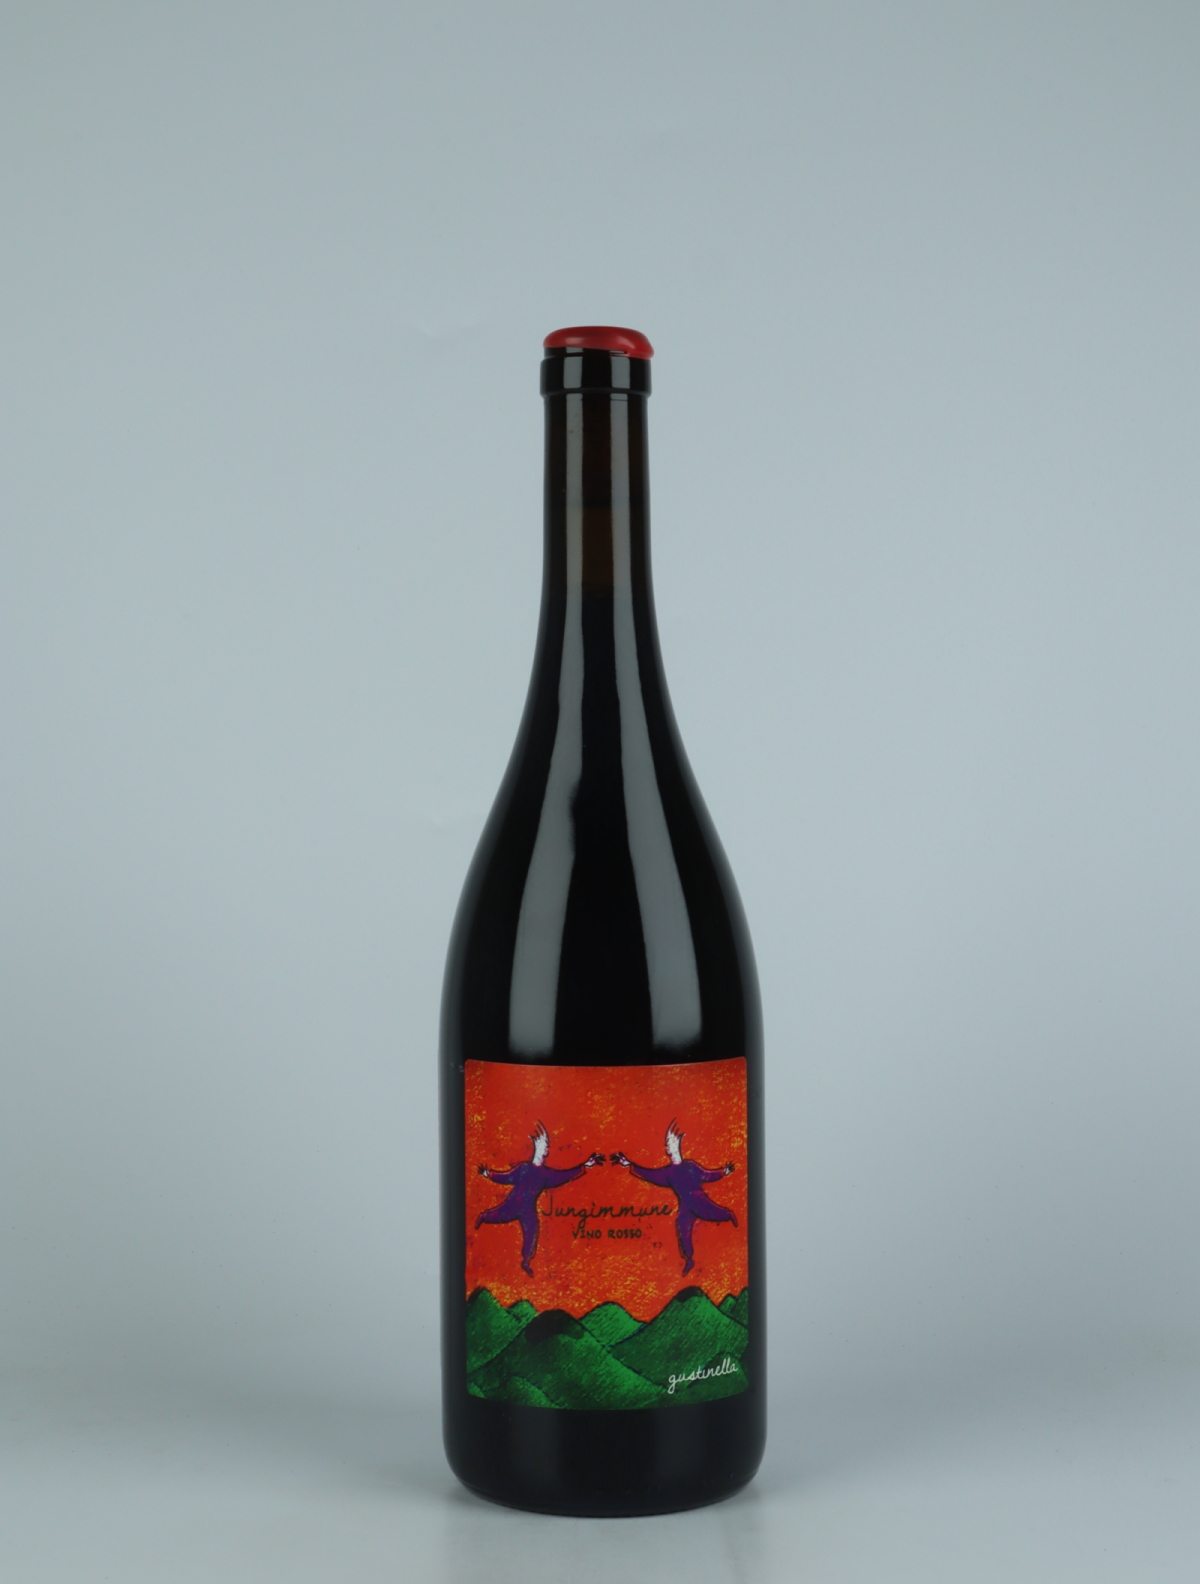 A bottle 2021 Jungimmune Rosso Red wine from Gustinella, Sicily in Italy